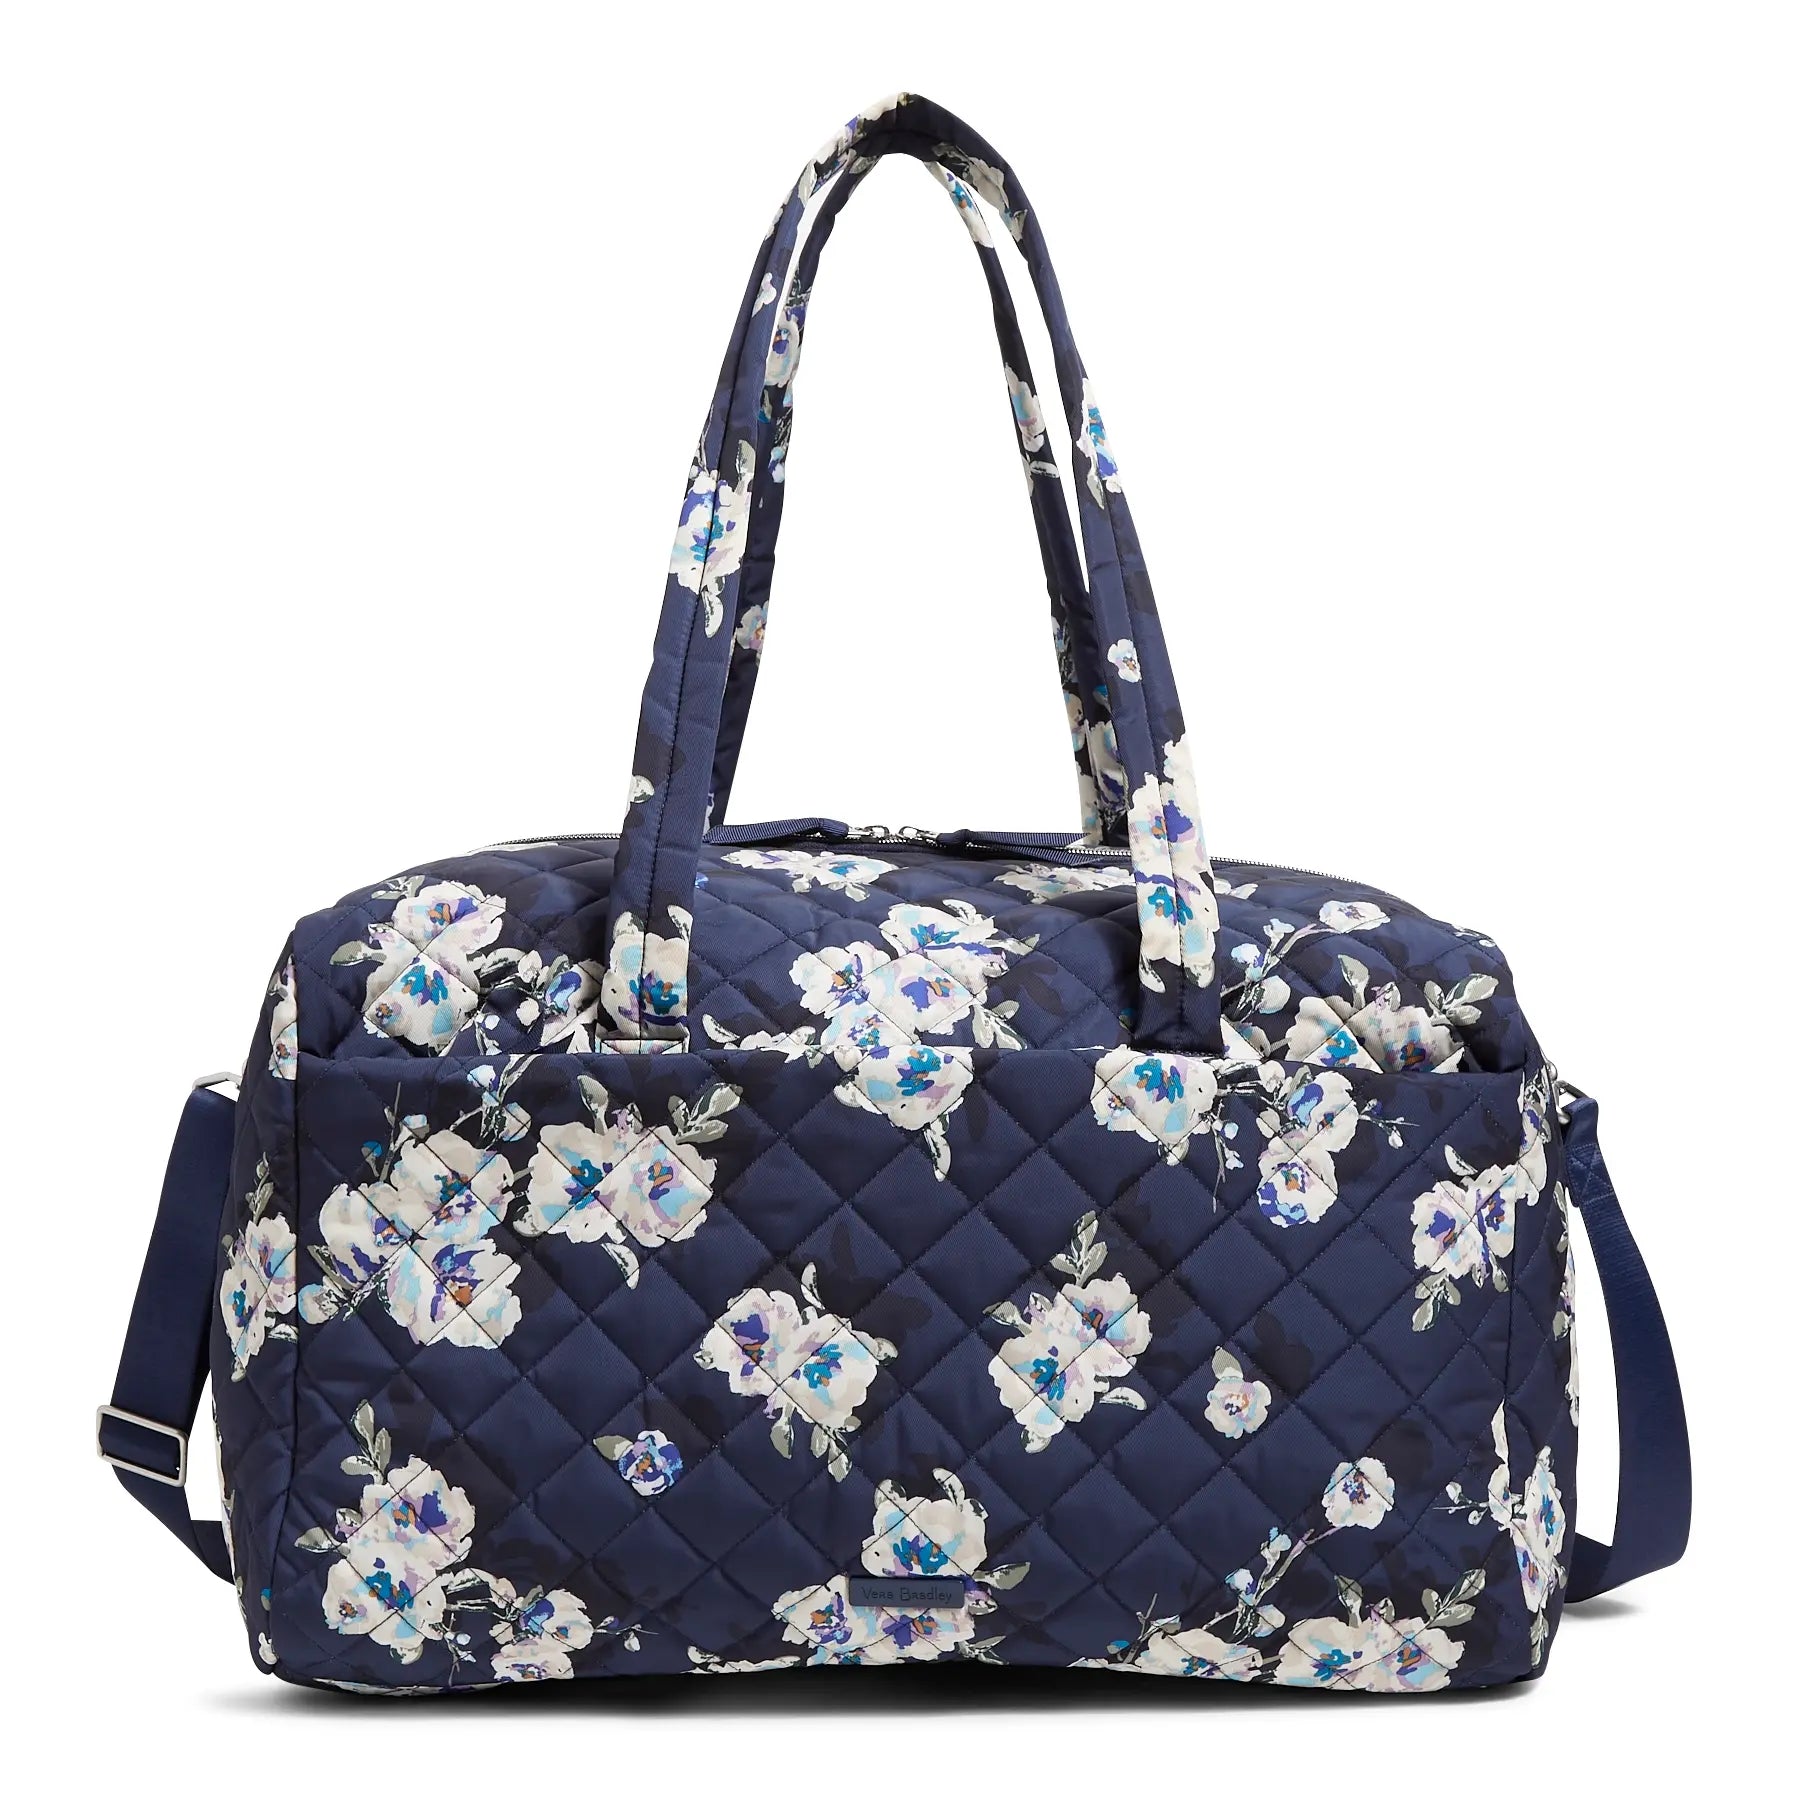 Vera Bradley Large Travel Duffel in Blooms and Branches Navy.